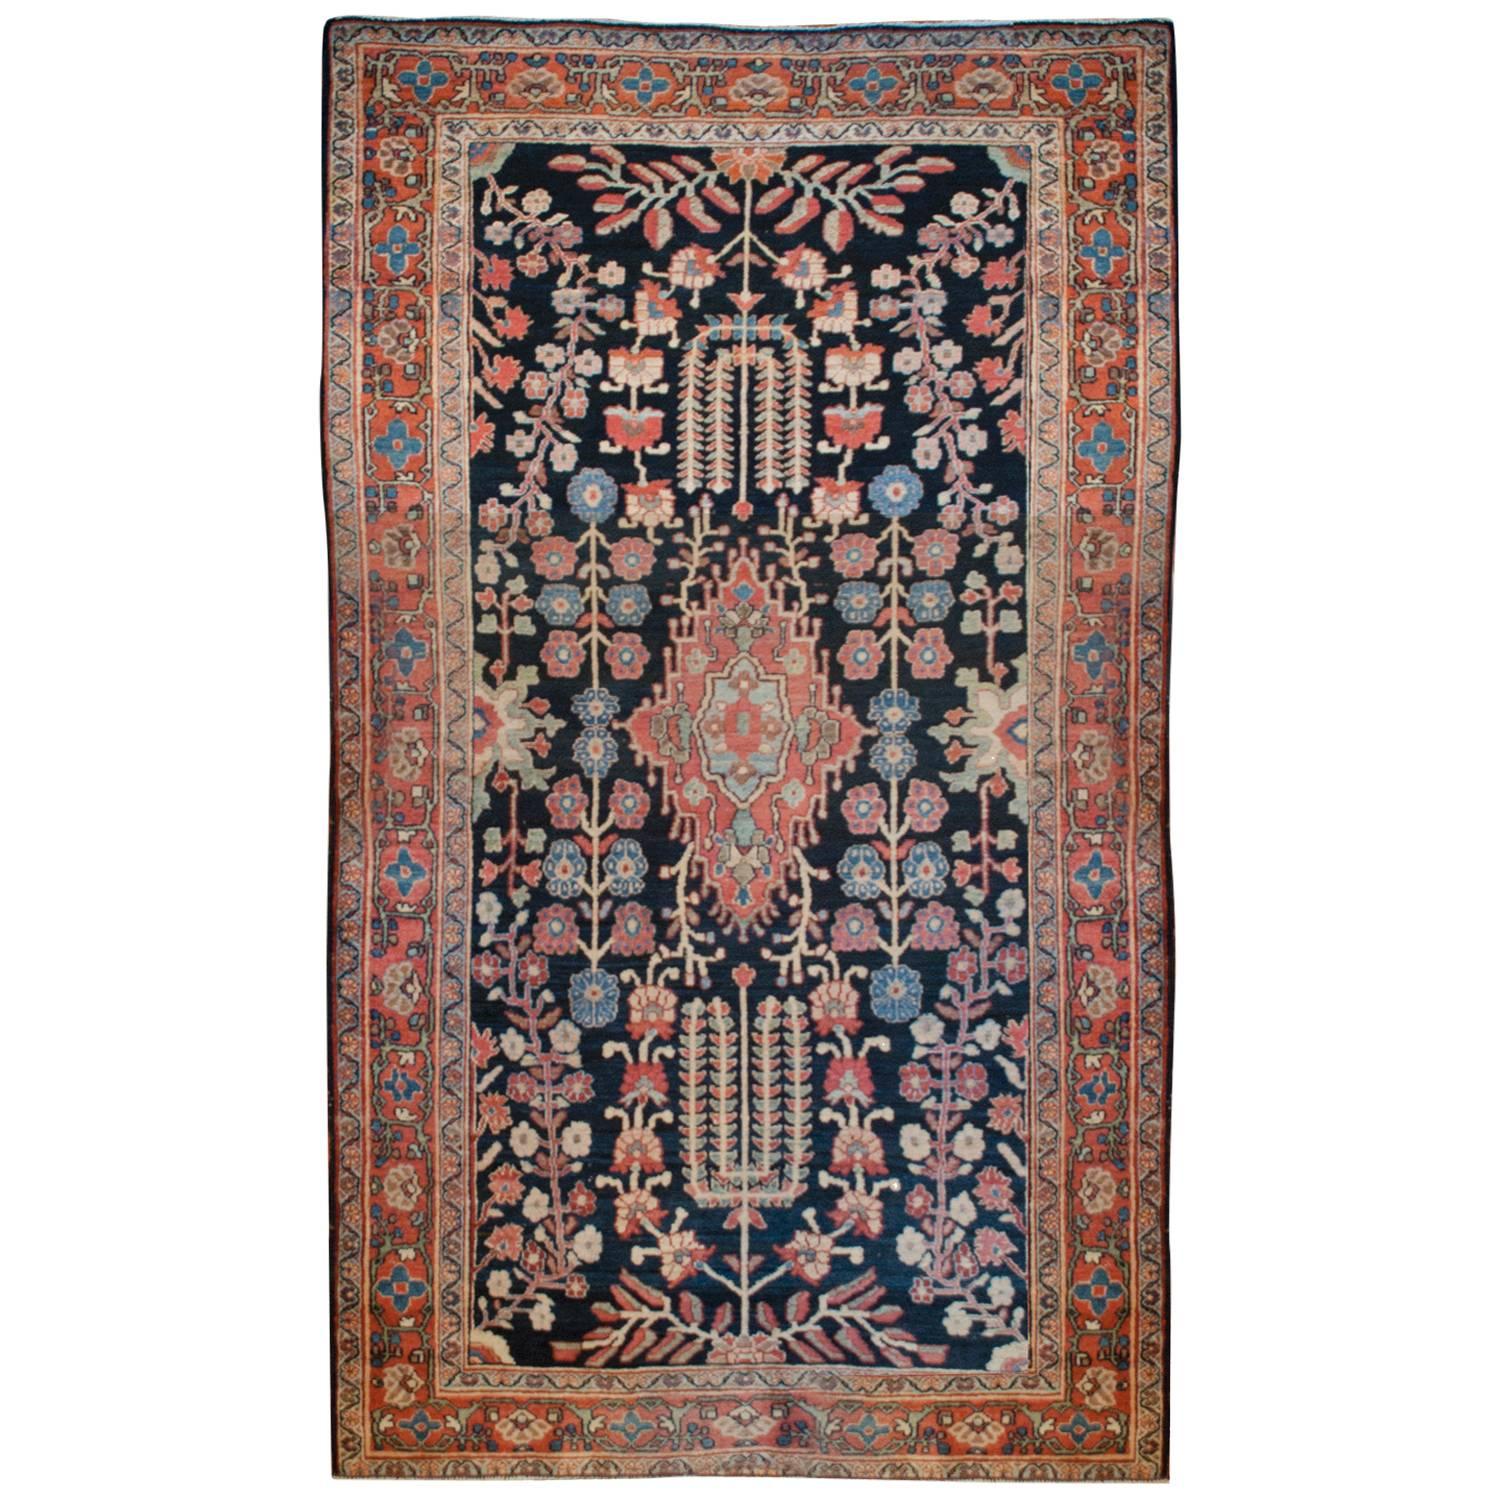 Unique Early 20th Century Sarouk Rug For Sale